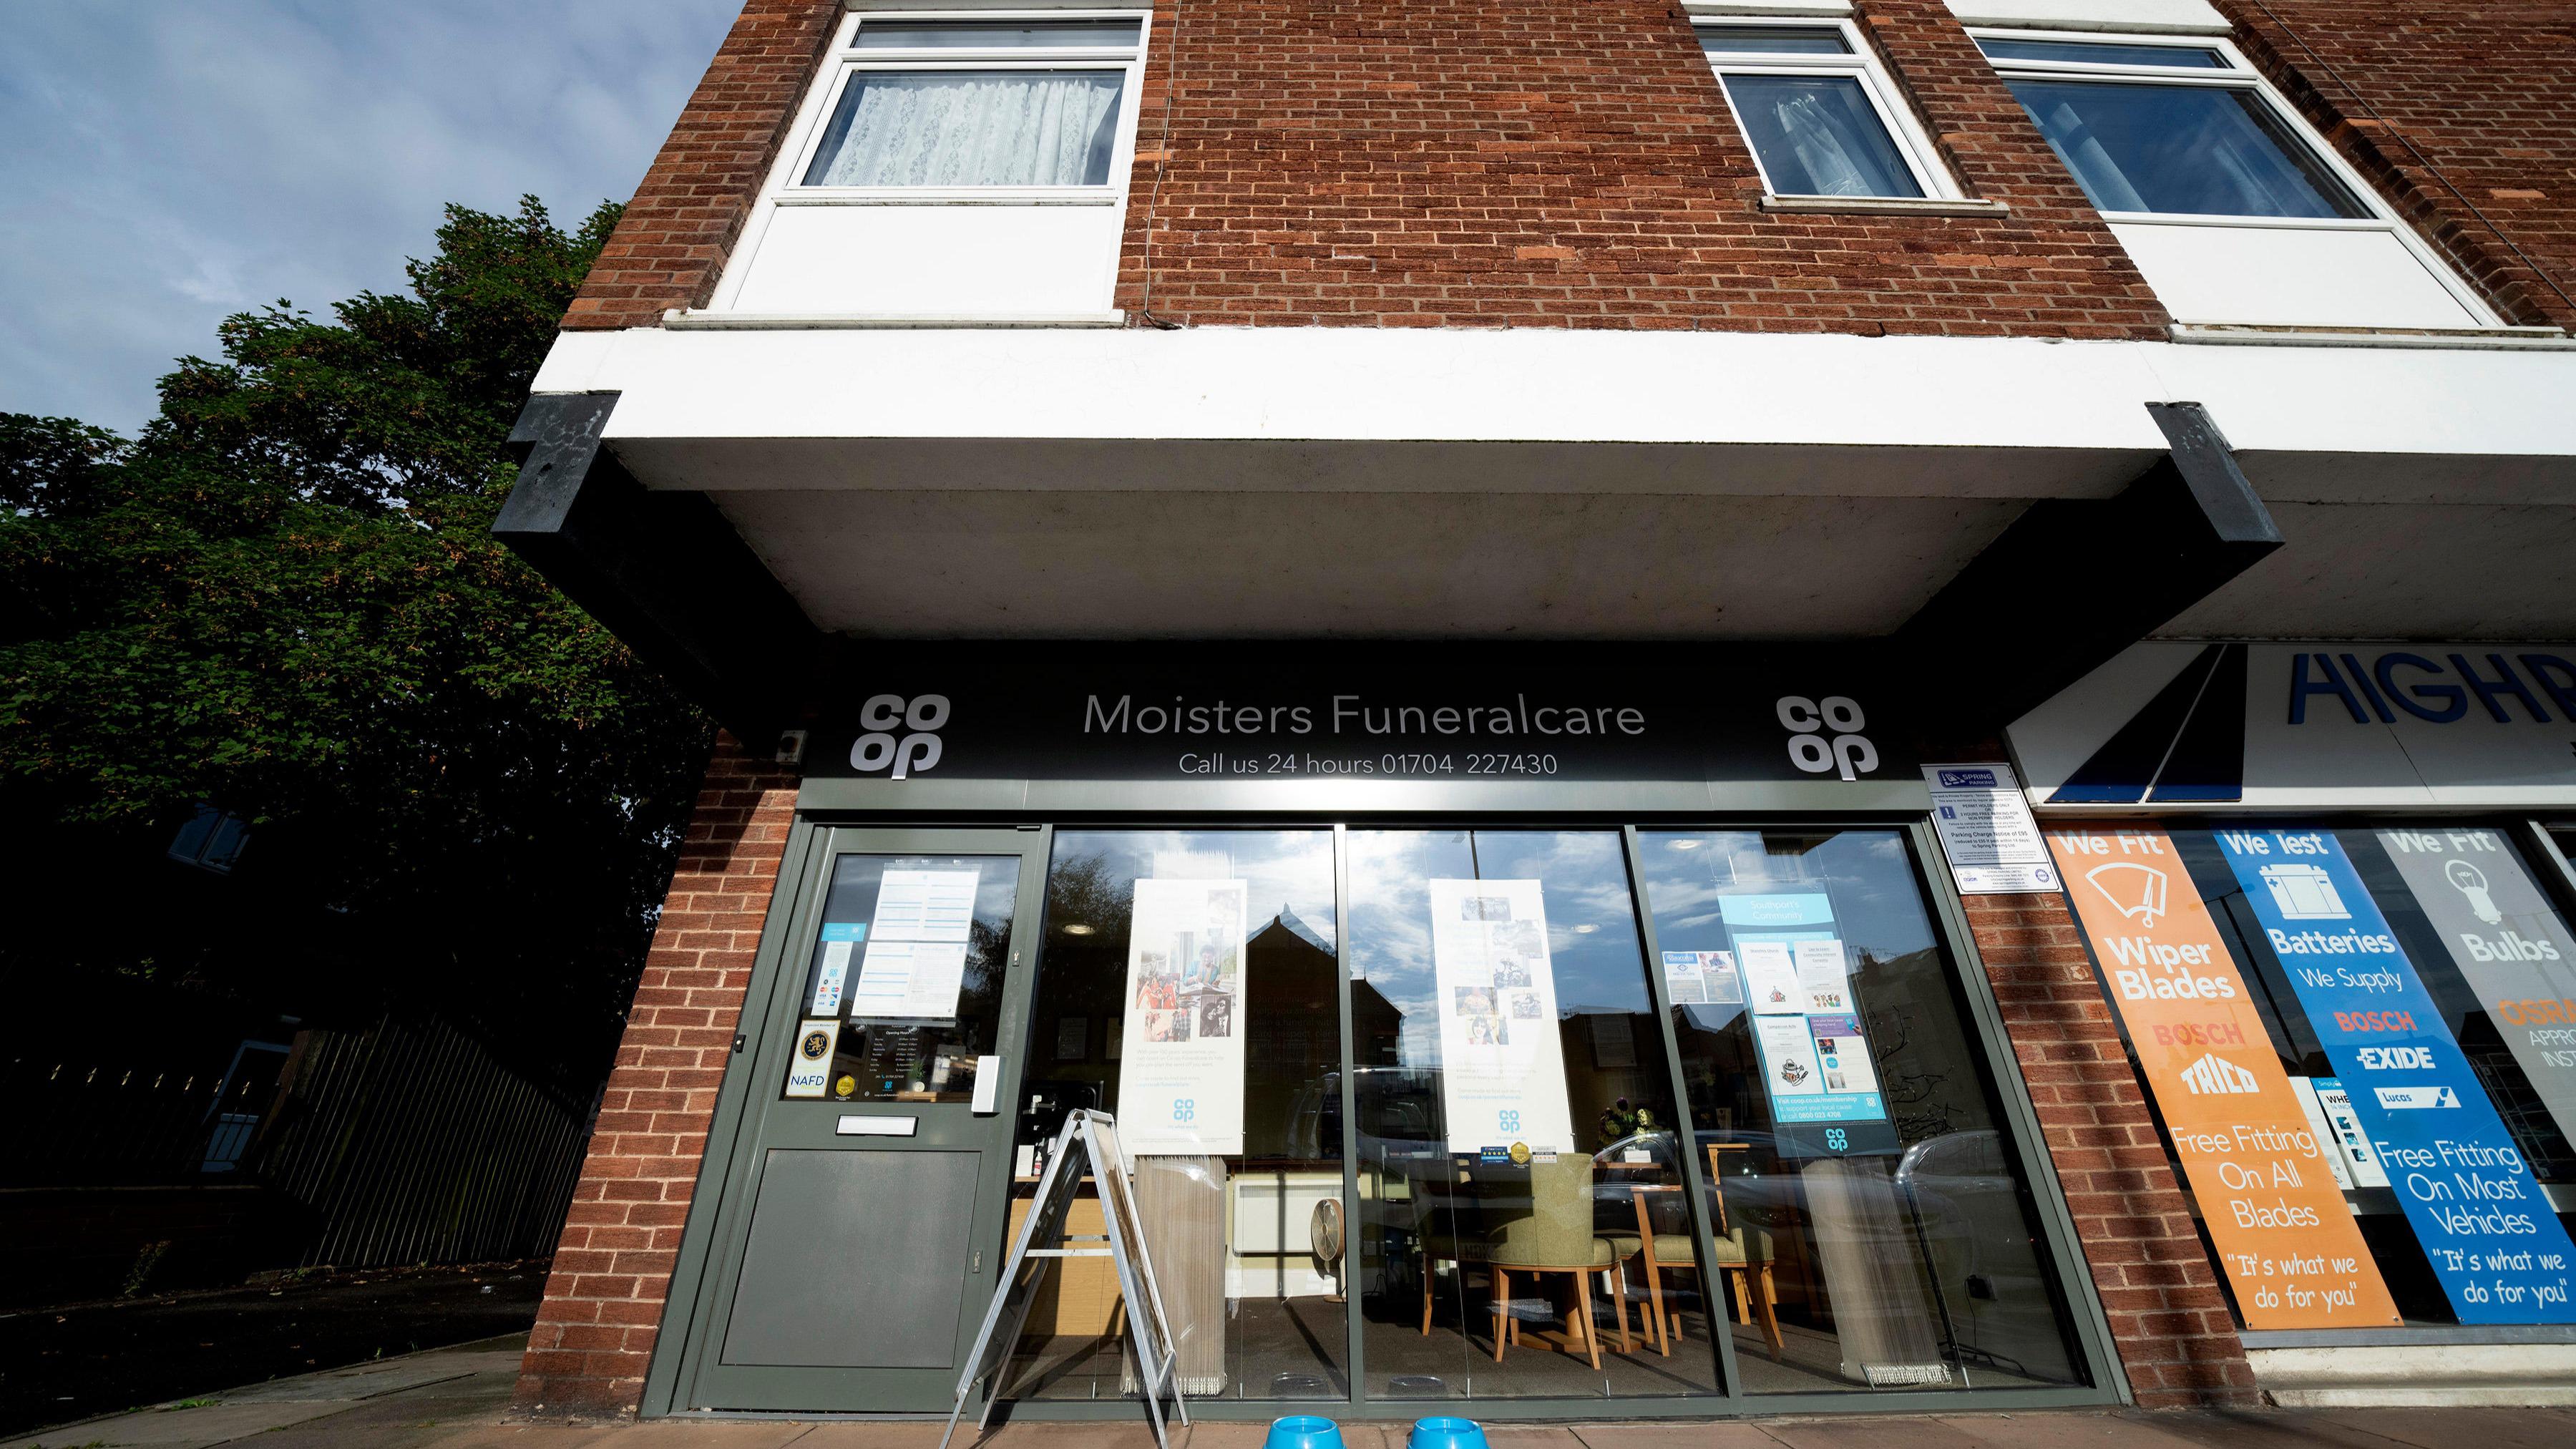 Images Moisters Funeralcare